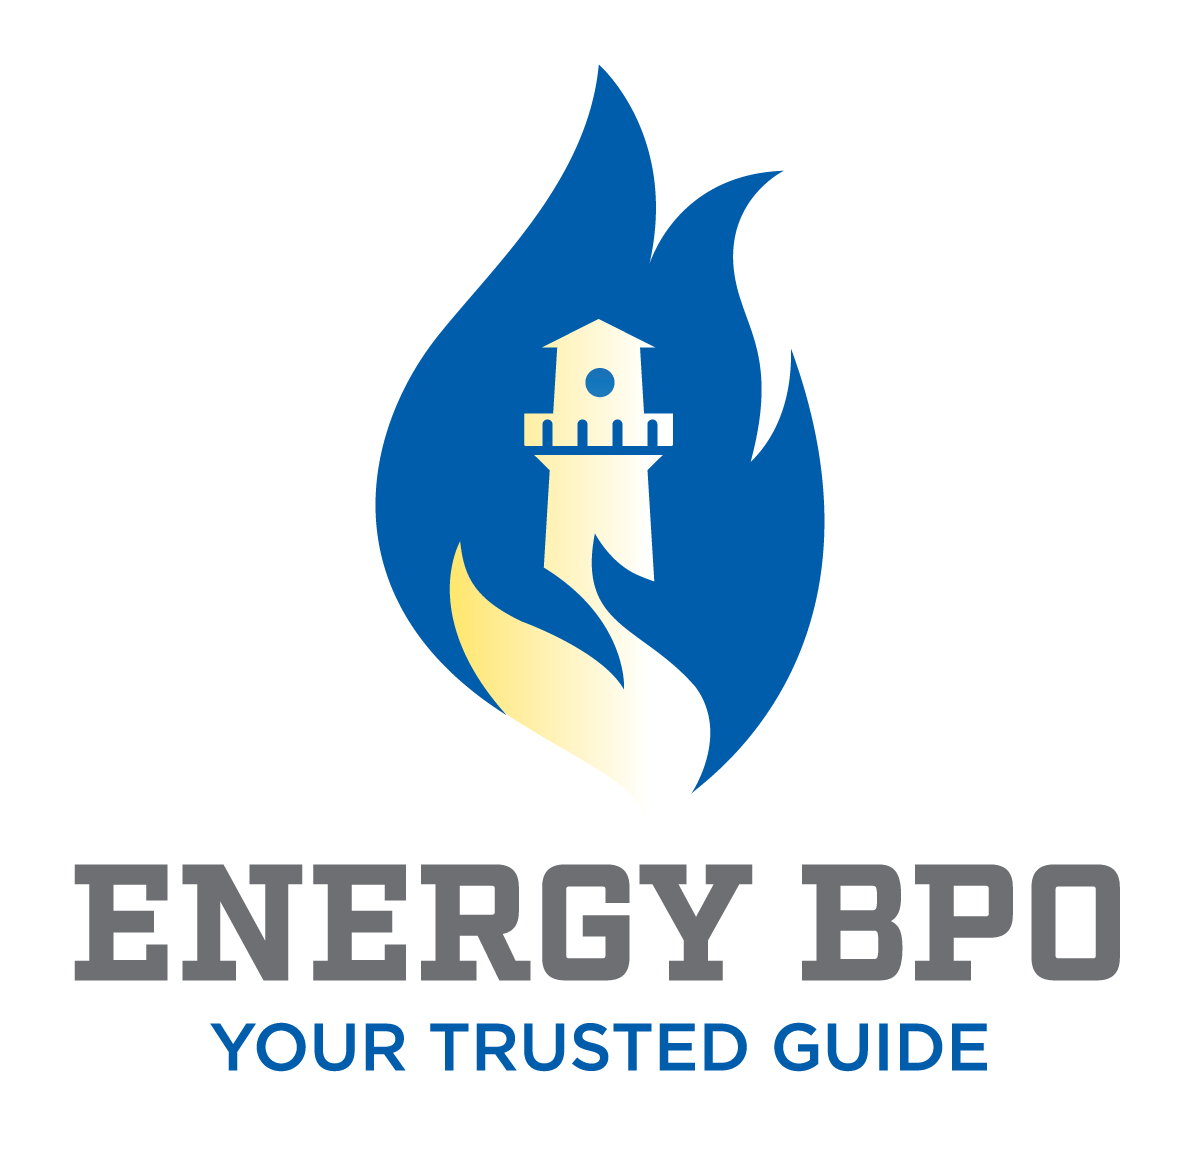 Energy BPO has signed an agreement to exclusively license Datascore Inc.’s Engagement Dialing for distribution in certain energy markets.